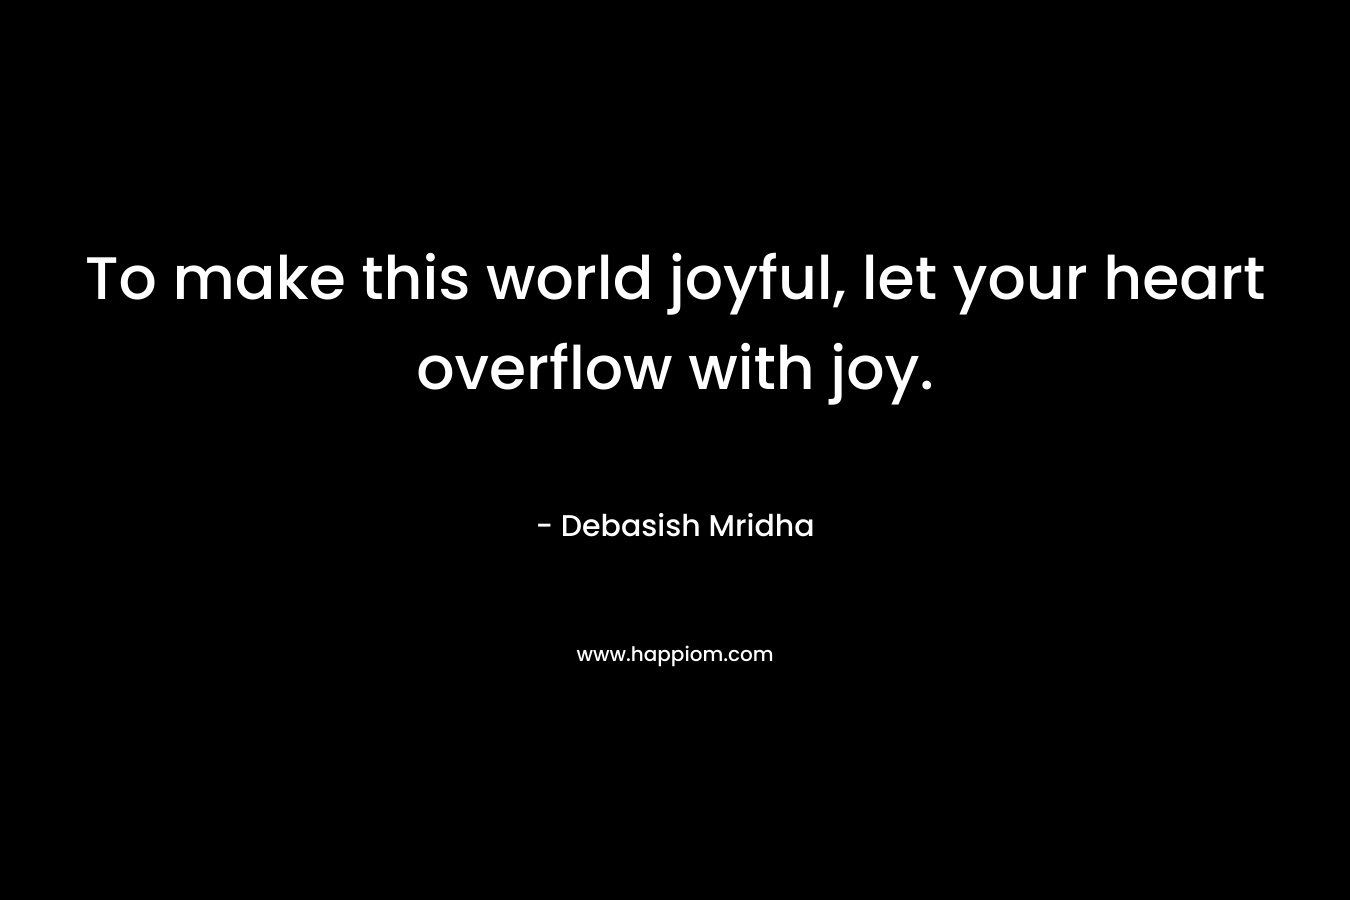 To make this world joyful, let your heart overflow with joy.